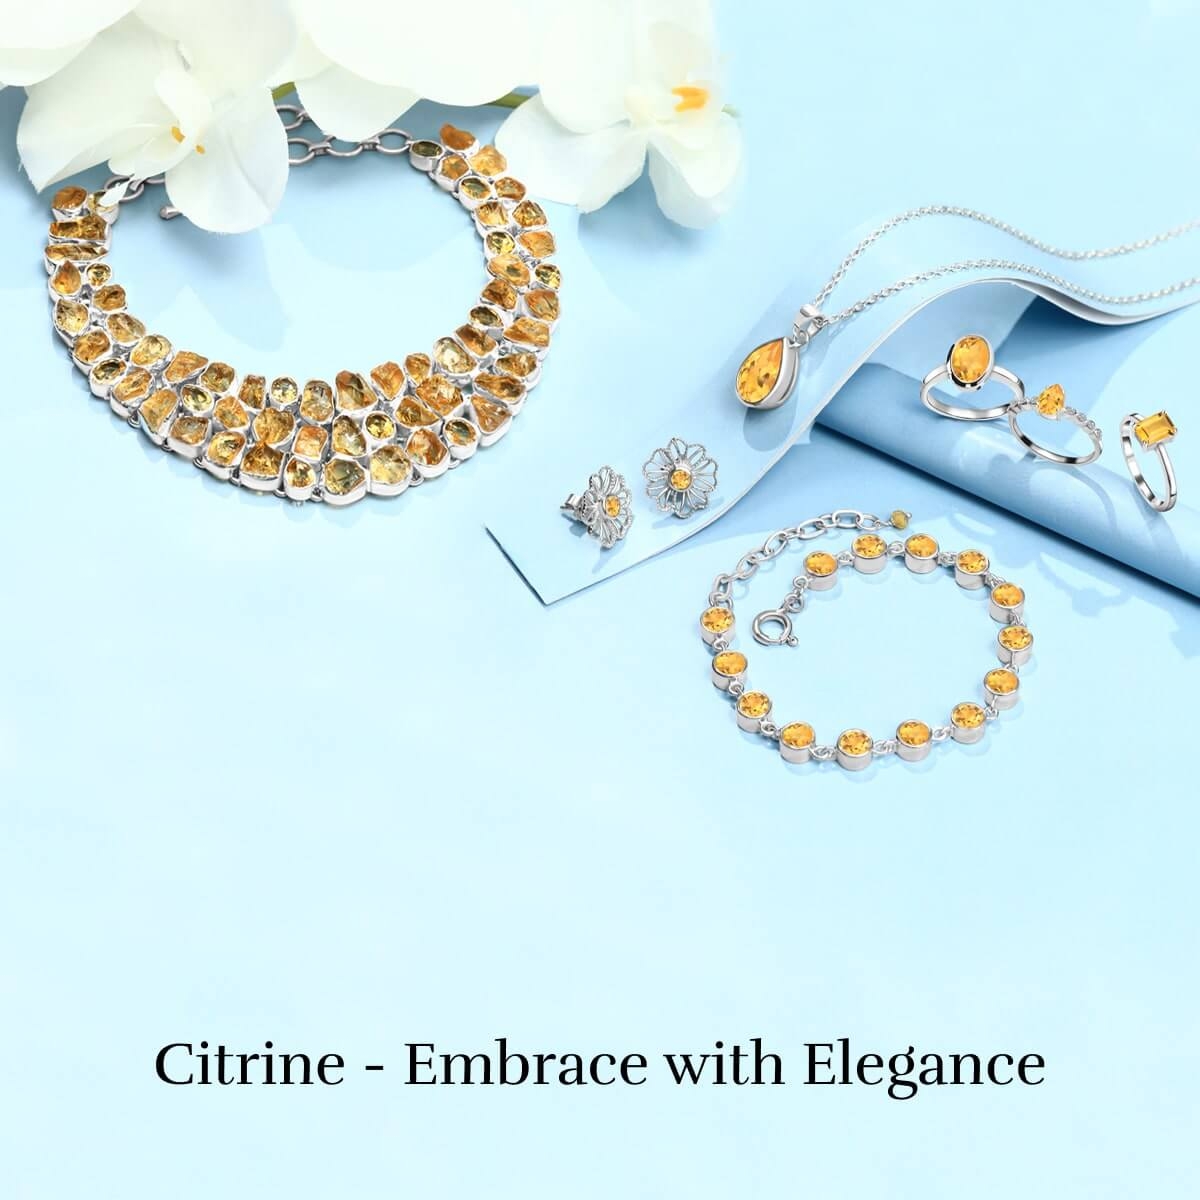 How to Wear Citrine